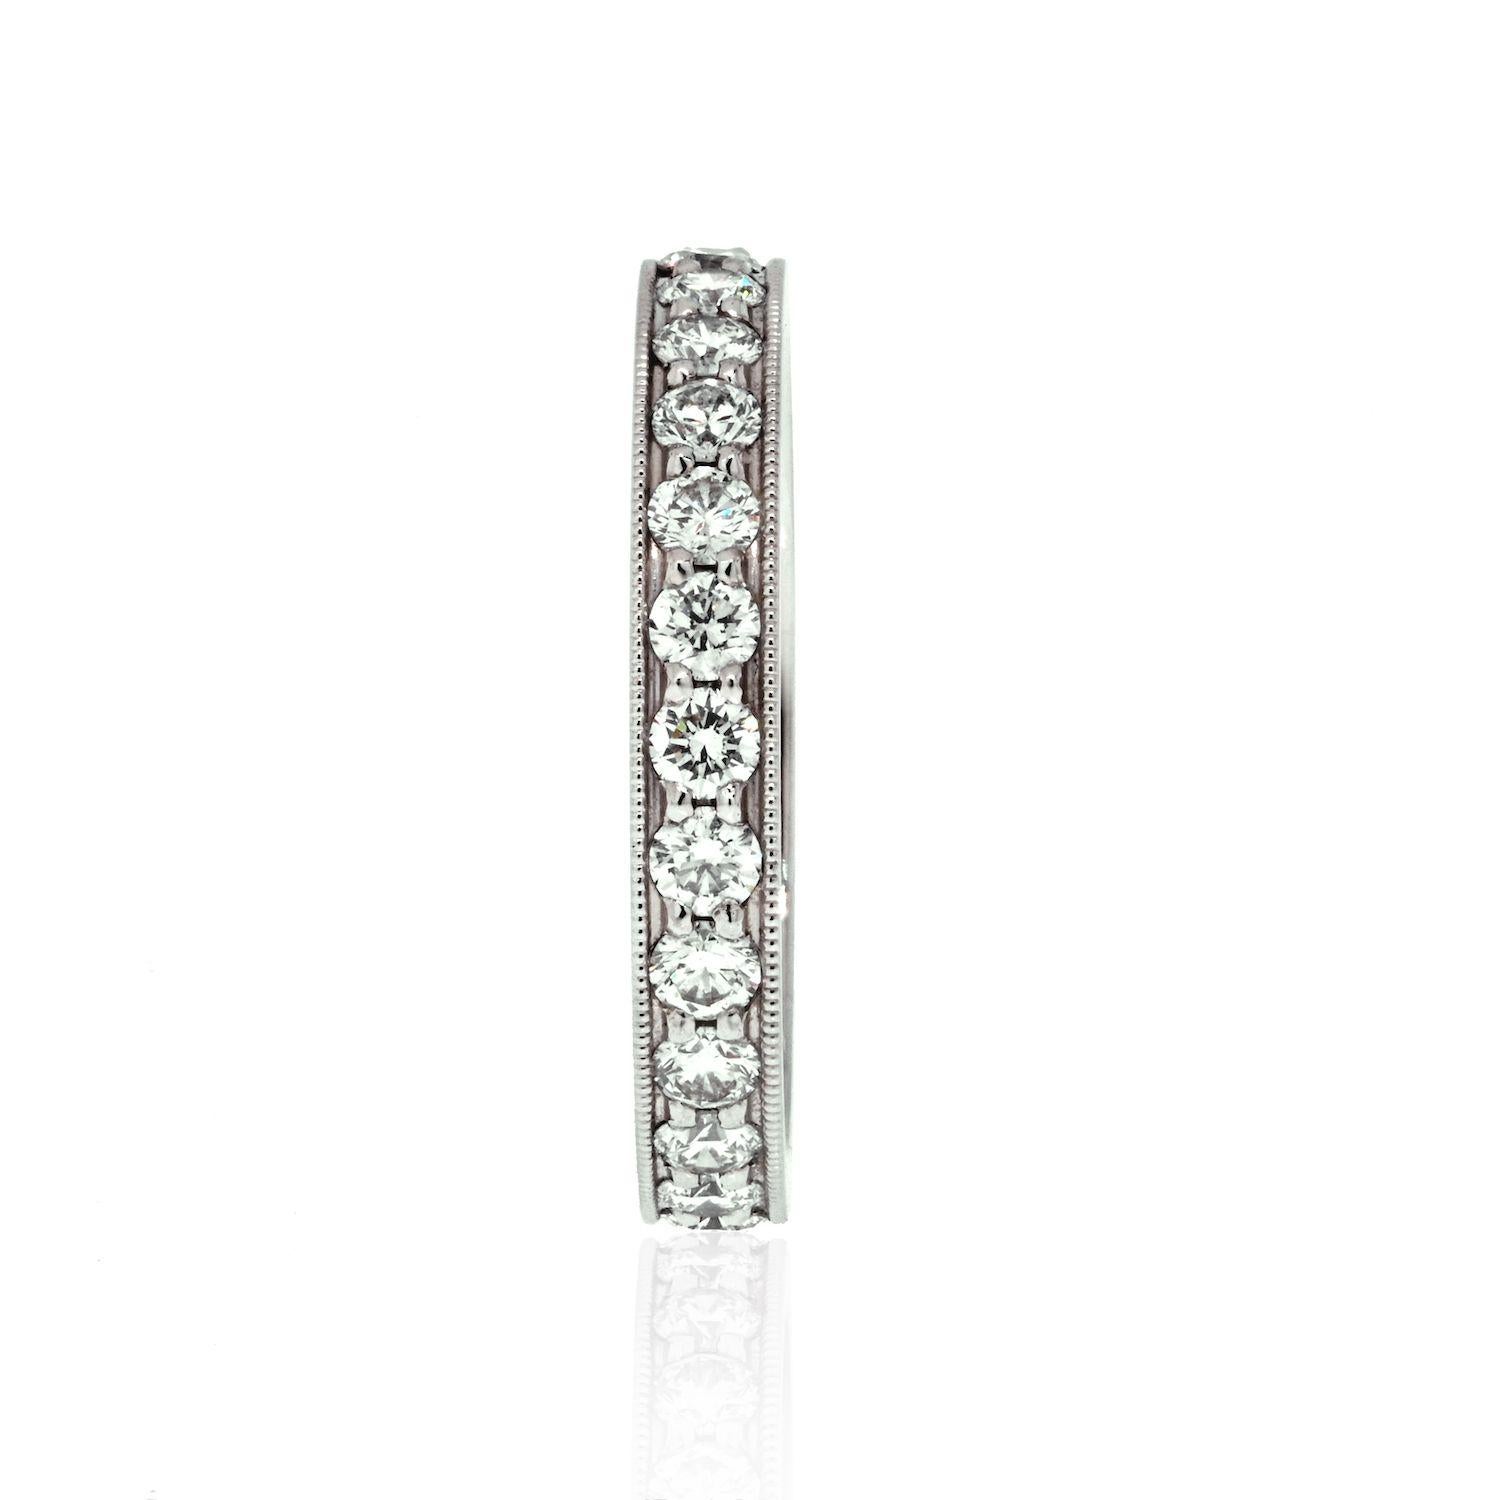 Tiffany & Co. Platinum Round Diamond Eternity From Legacy Collection Ring.

This is a beautiful Legacy diamond eternity band with round cut diamonds in perfect condition. Made in platinum comes with the original Tiffany black and outer blue